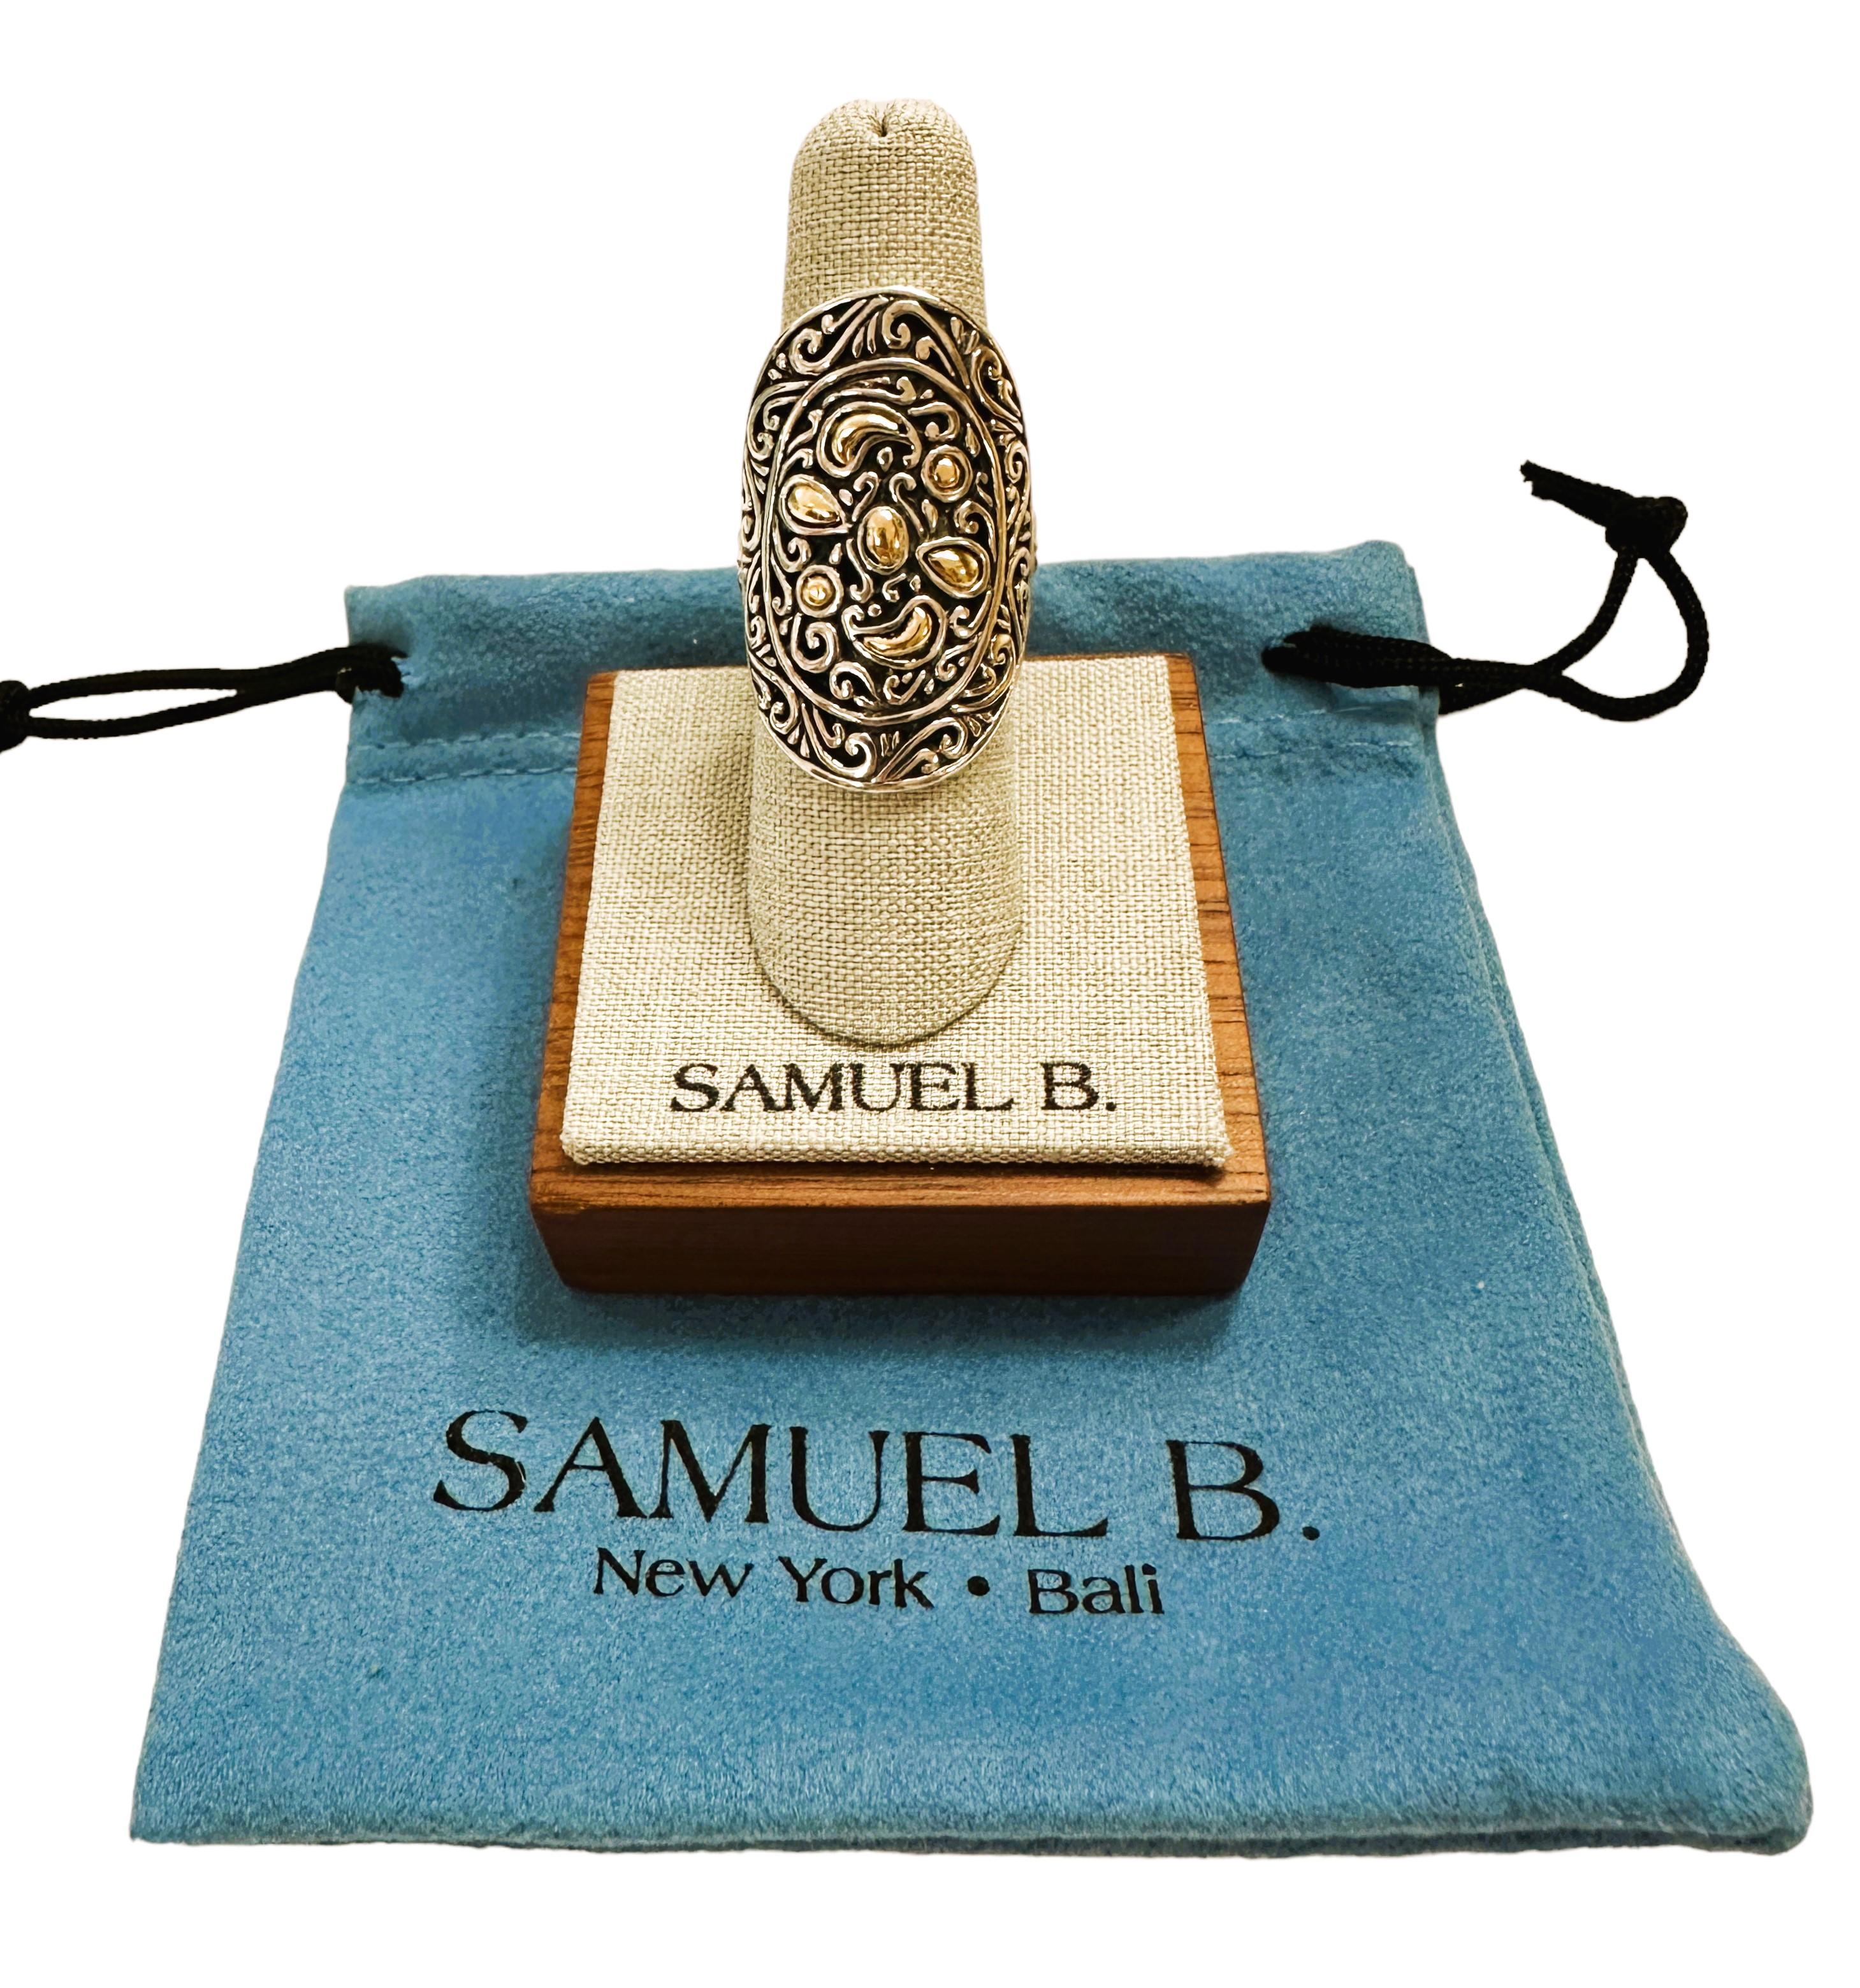 This is a beautiful ring by Samuel B Benham BJC.  It comes with the stand and a blue pouch. It's just a unique design.  It's a size 6.5 and the ring is 1.25 inches long and .75 inches wide.  It is stamped 